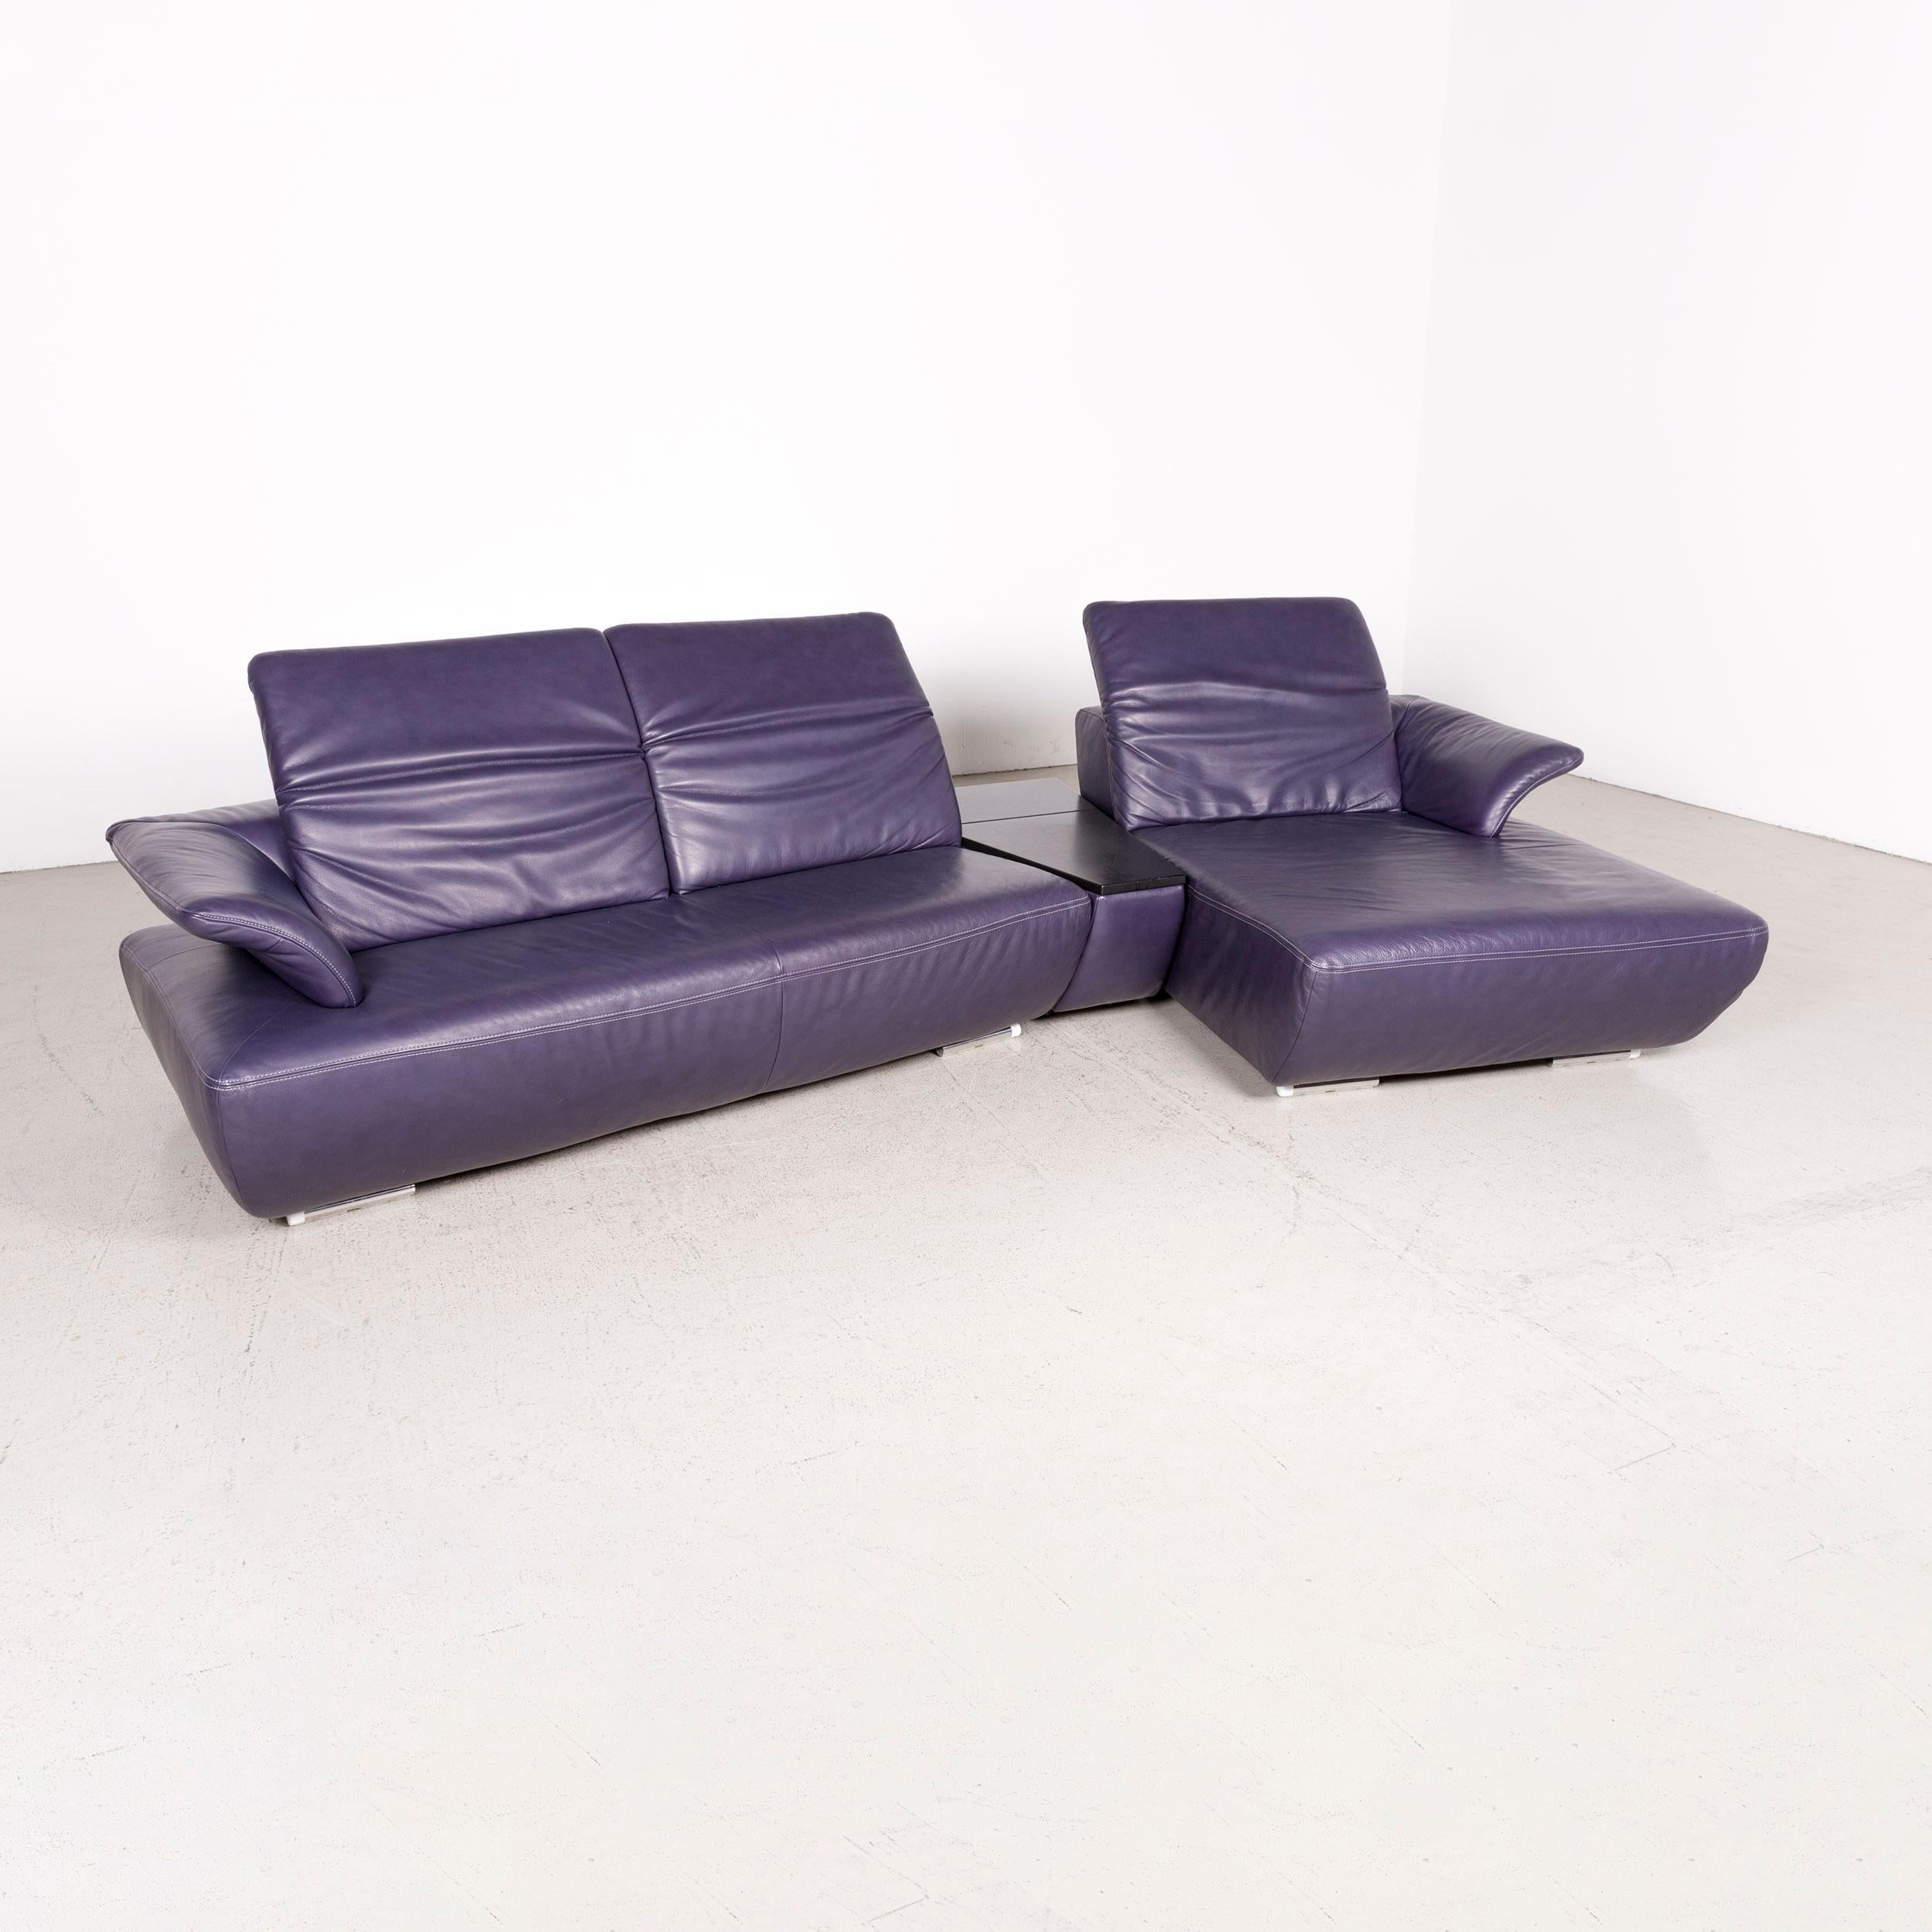 We bring to you a Koinor Avanti designer leather corner sofa purple genuine leather sofa couch.

Product measurements in centimeters:

Depth 180
Width 360
Height 85
Seat-height 45
Rest-height 65
Seat-depth 50
Seat-width 115
Back-height 